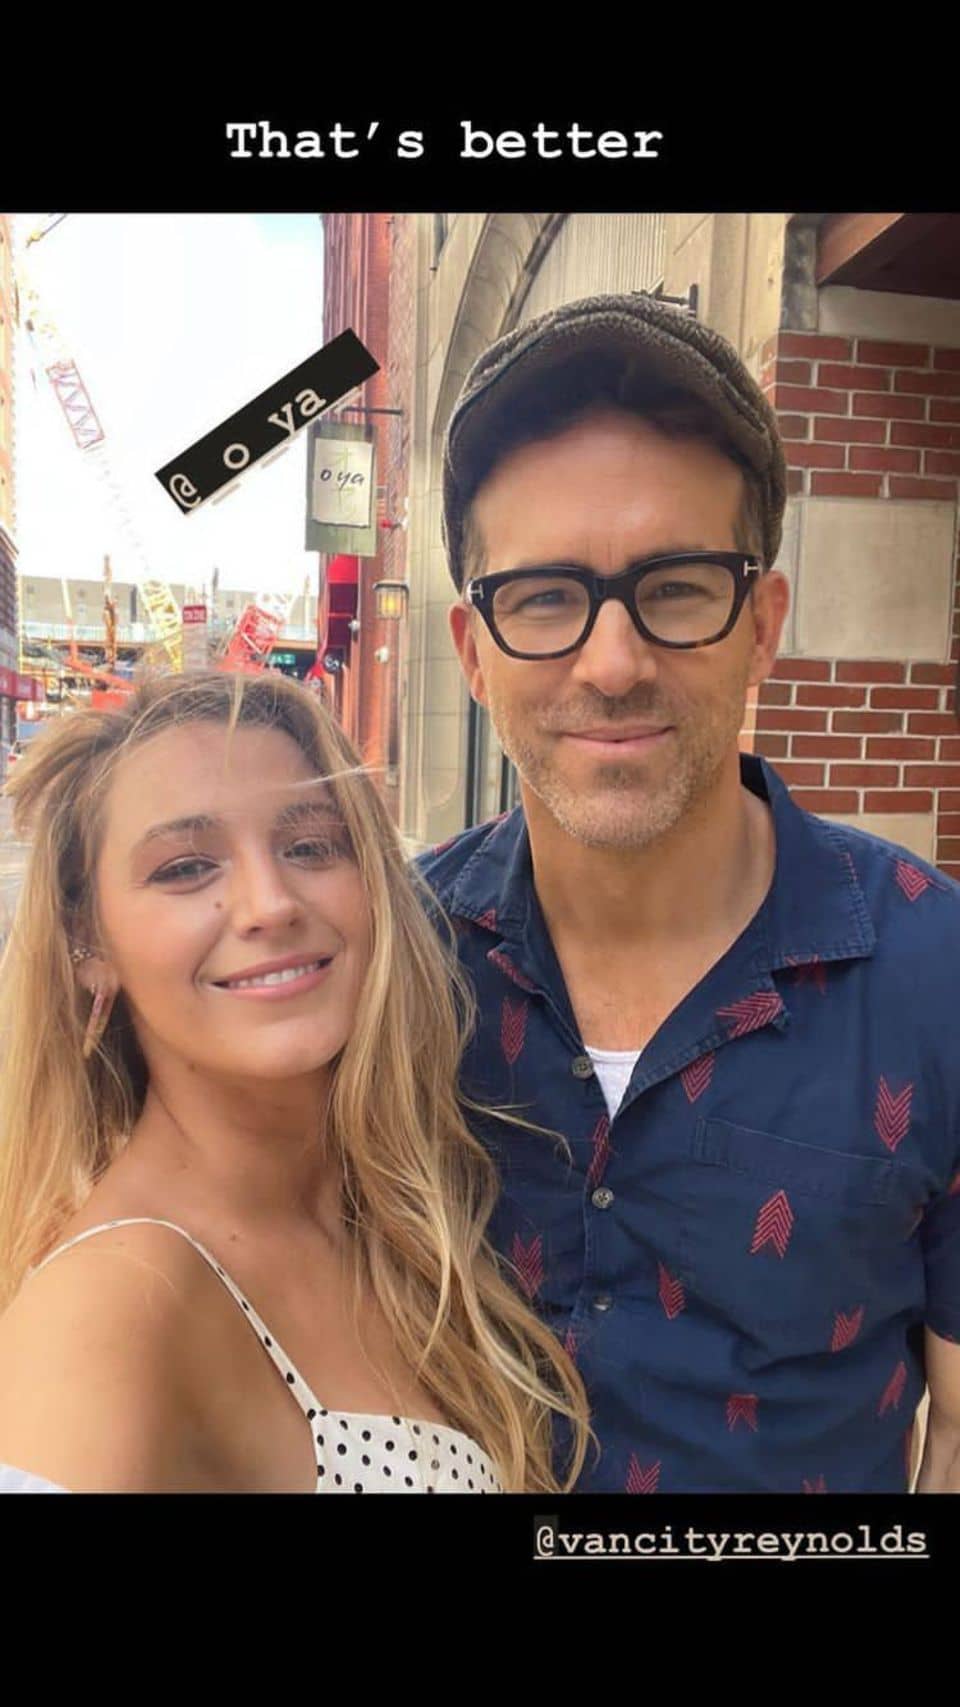 Blake Lively shares a cute snapshot of her date with Ryan Reynolds.